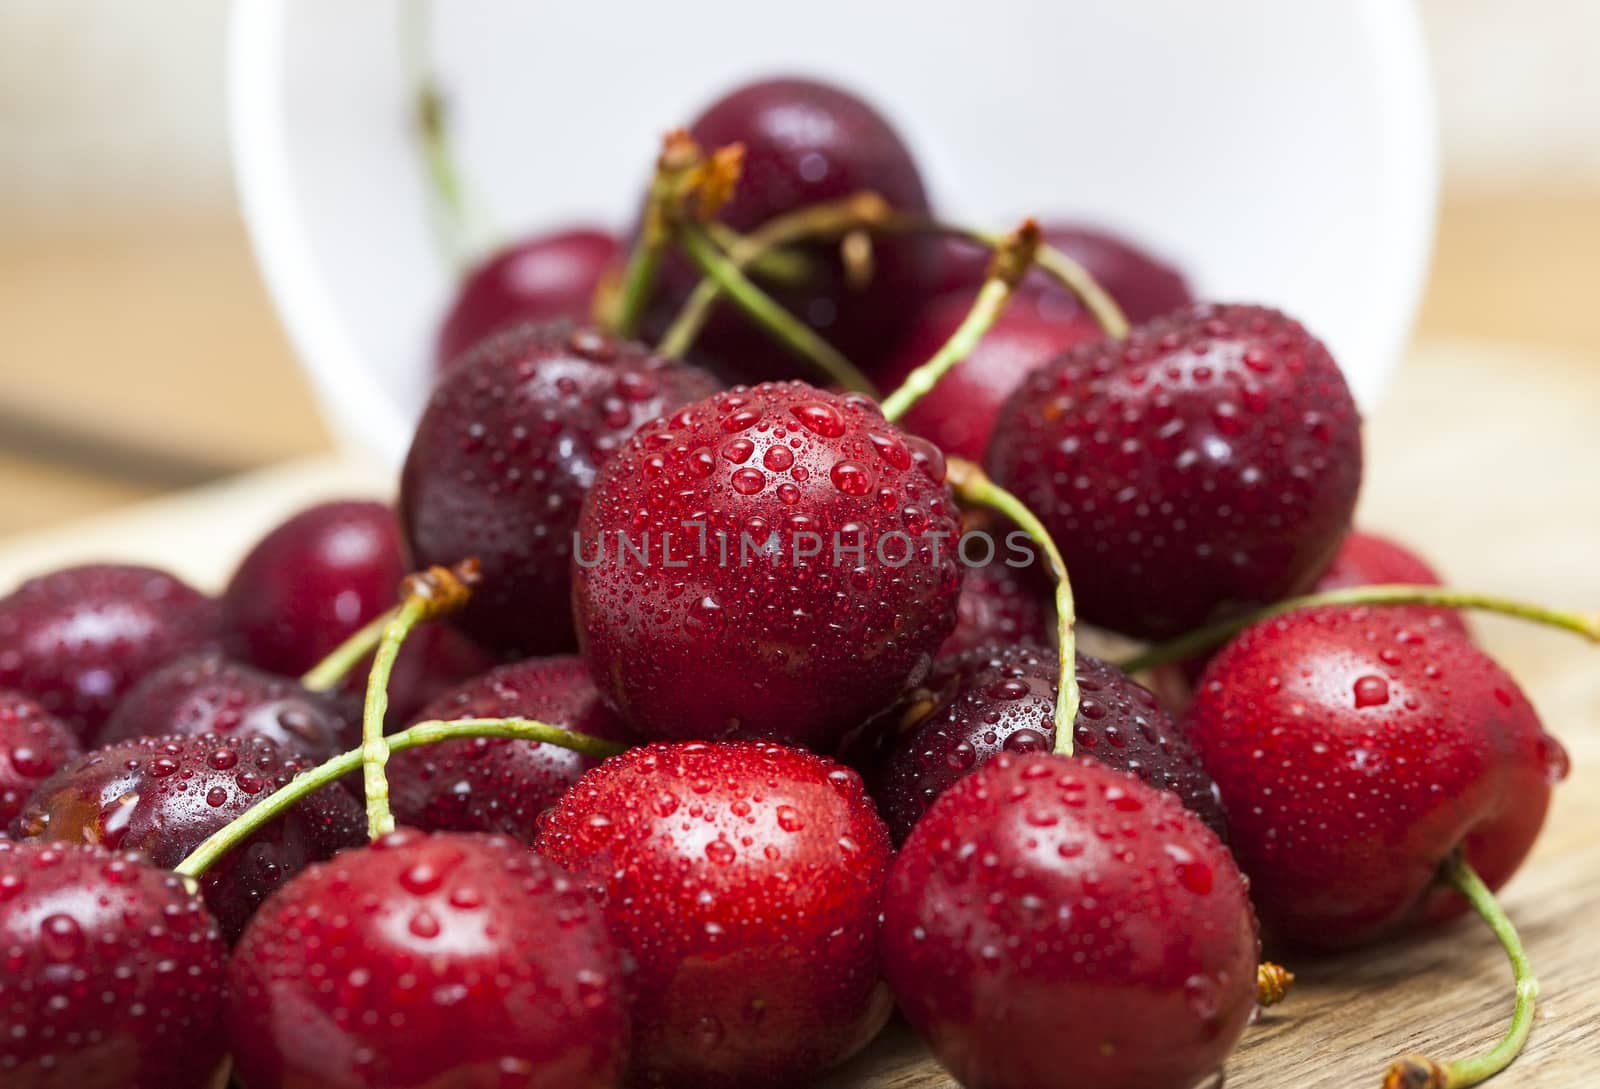 ripe cherry maroon covered with water drops. Berries are together after the harvest. Small depth of field. Photo taken closeup.